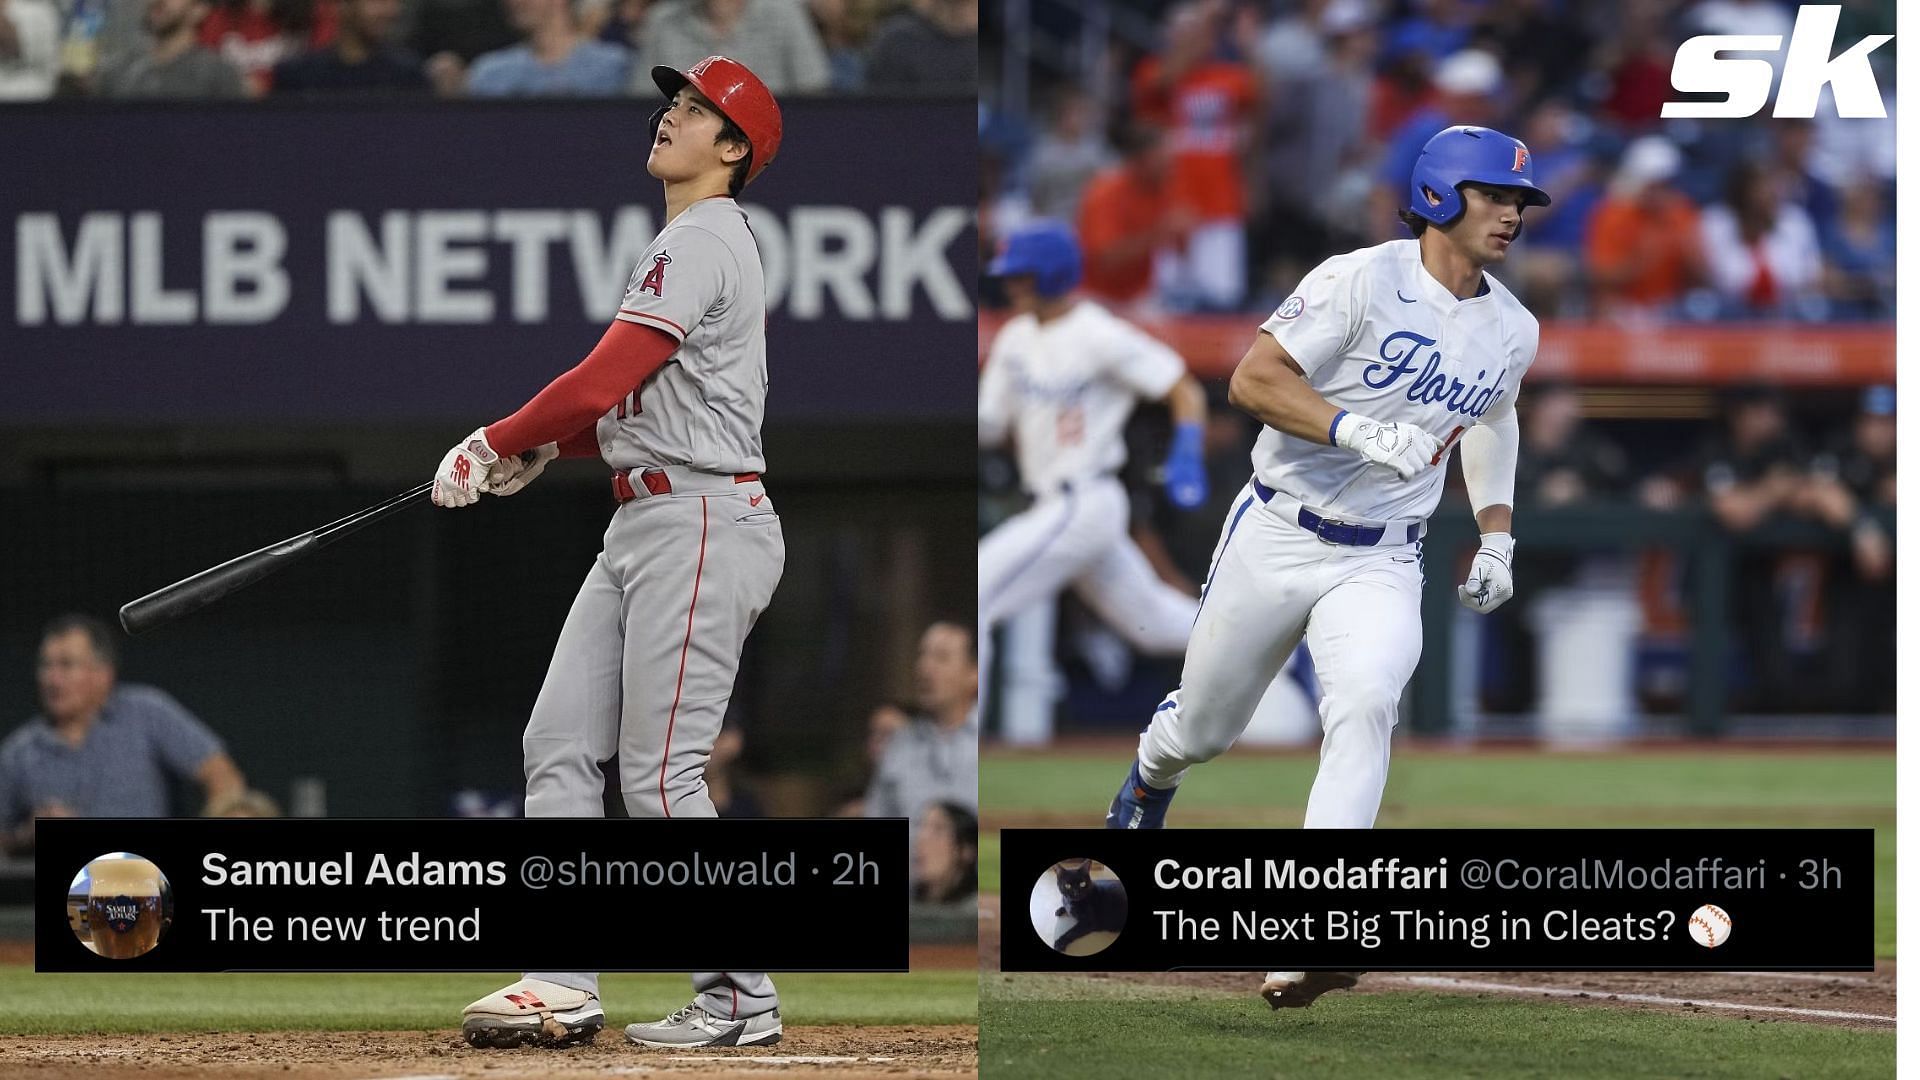 MLB Twitter reacts to University of Florida two-way player Jac Caglianone,  deeming him the next Shohei Ohtani: The next big thing in cleats?